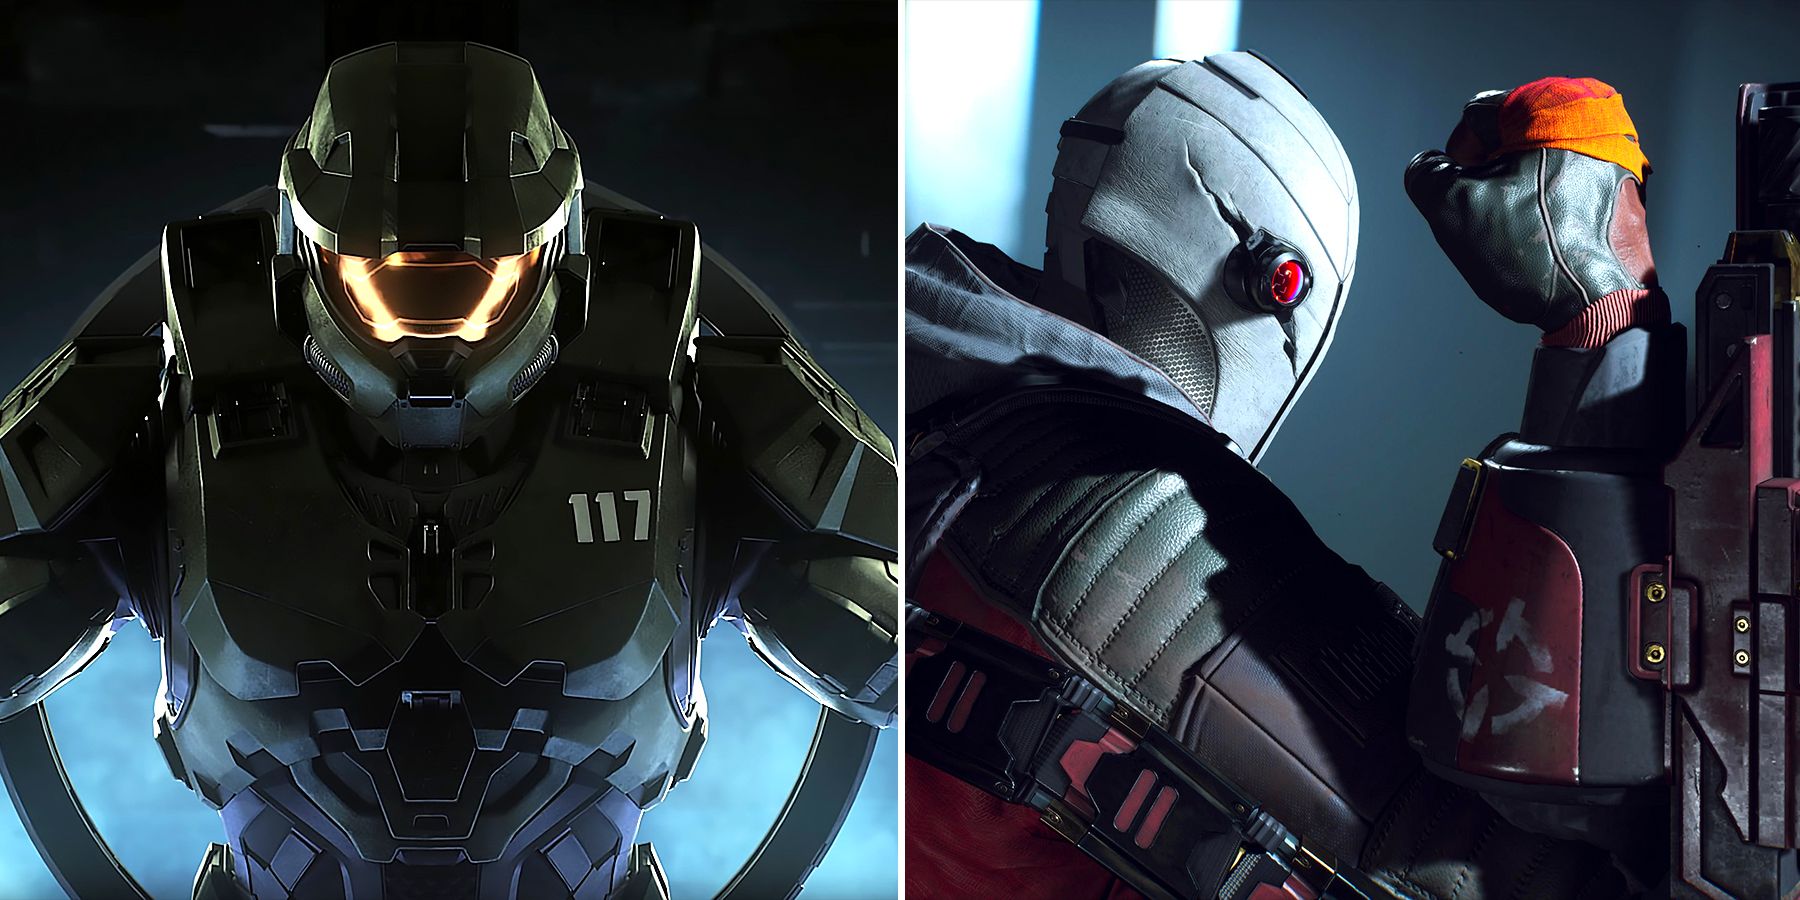 Master Chief from Halo and Deadshot from Suicide Squad Kill the Justice League